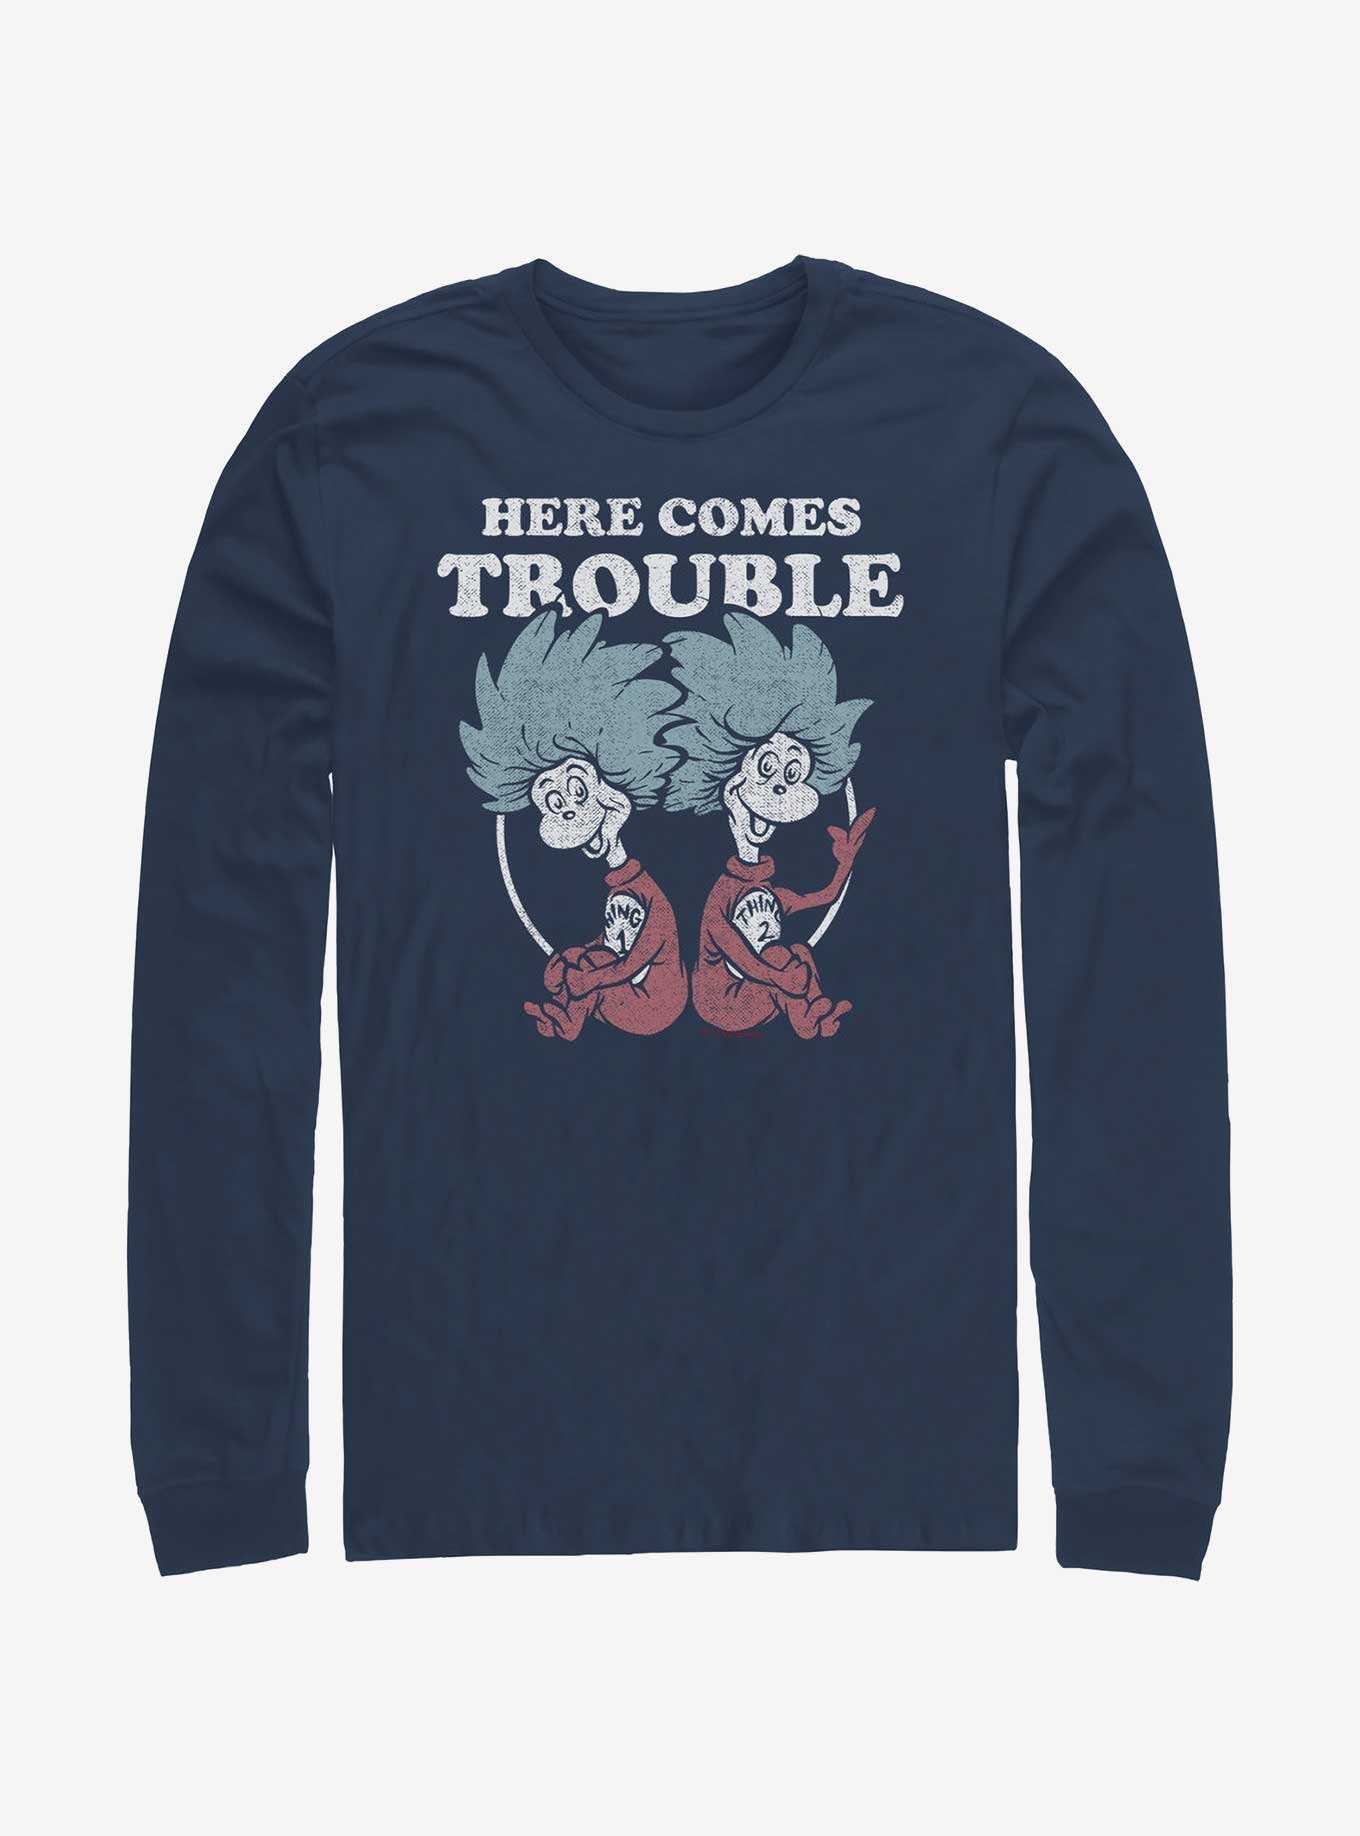 Dr. Seuss Thing 1 and Thing 2 Trouble Long-Sleeve T-Shirt, , hi-res